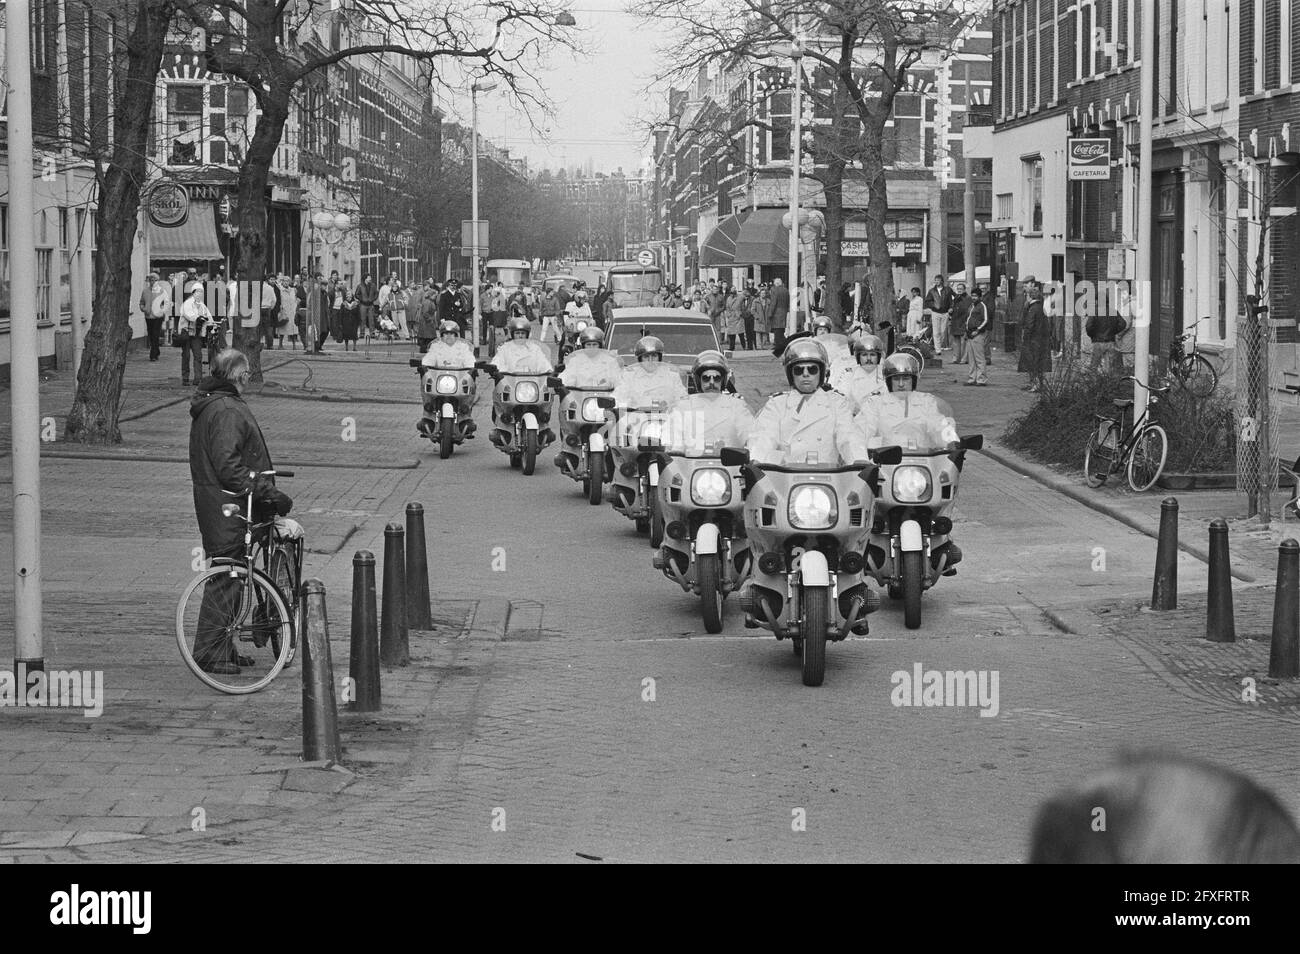 Funeral of senior police officer W. Schepen, shot dead last Saturday, the procession was surrounded by members of the Rotterdam motorcycle police, February 7, 1985, Funerals, processions, The Netherlands, 20th century press agency photo, news to remember, documentary, historic photography 1945-1990, visual stories, human history of the Twentieth Century, capturing moments in time Stock Photo